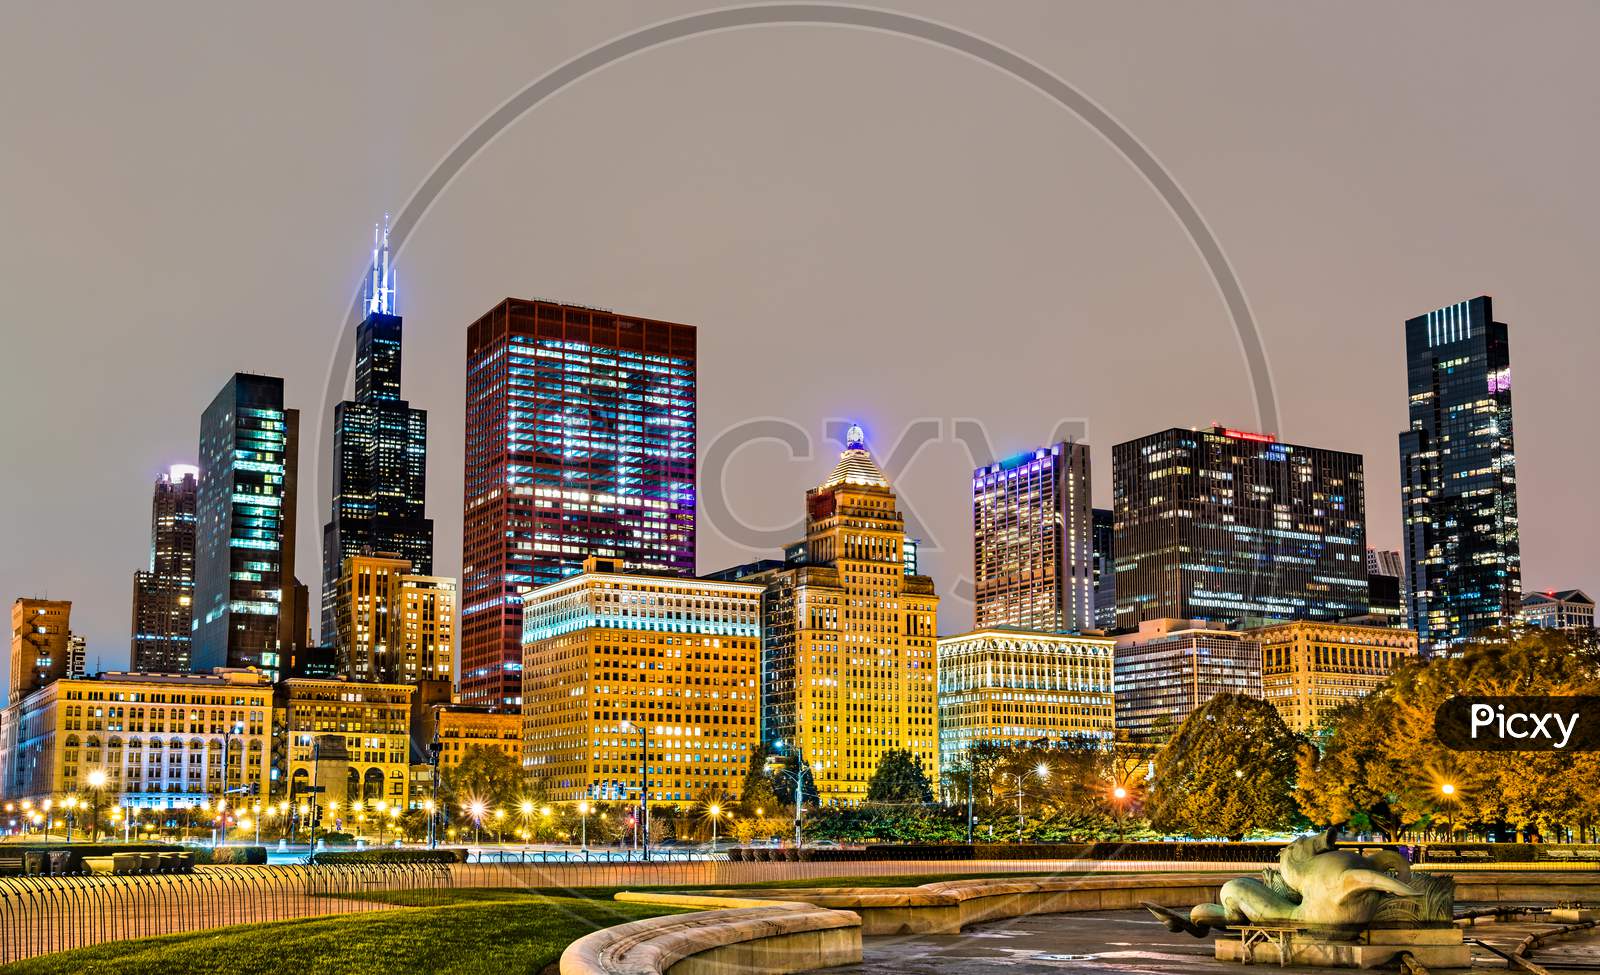 Night Cityscape Of Chicago At Grant Park In Illinois, United States